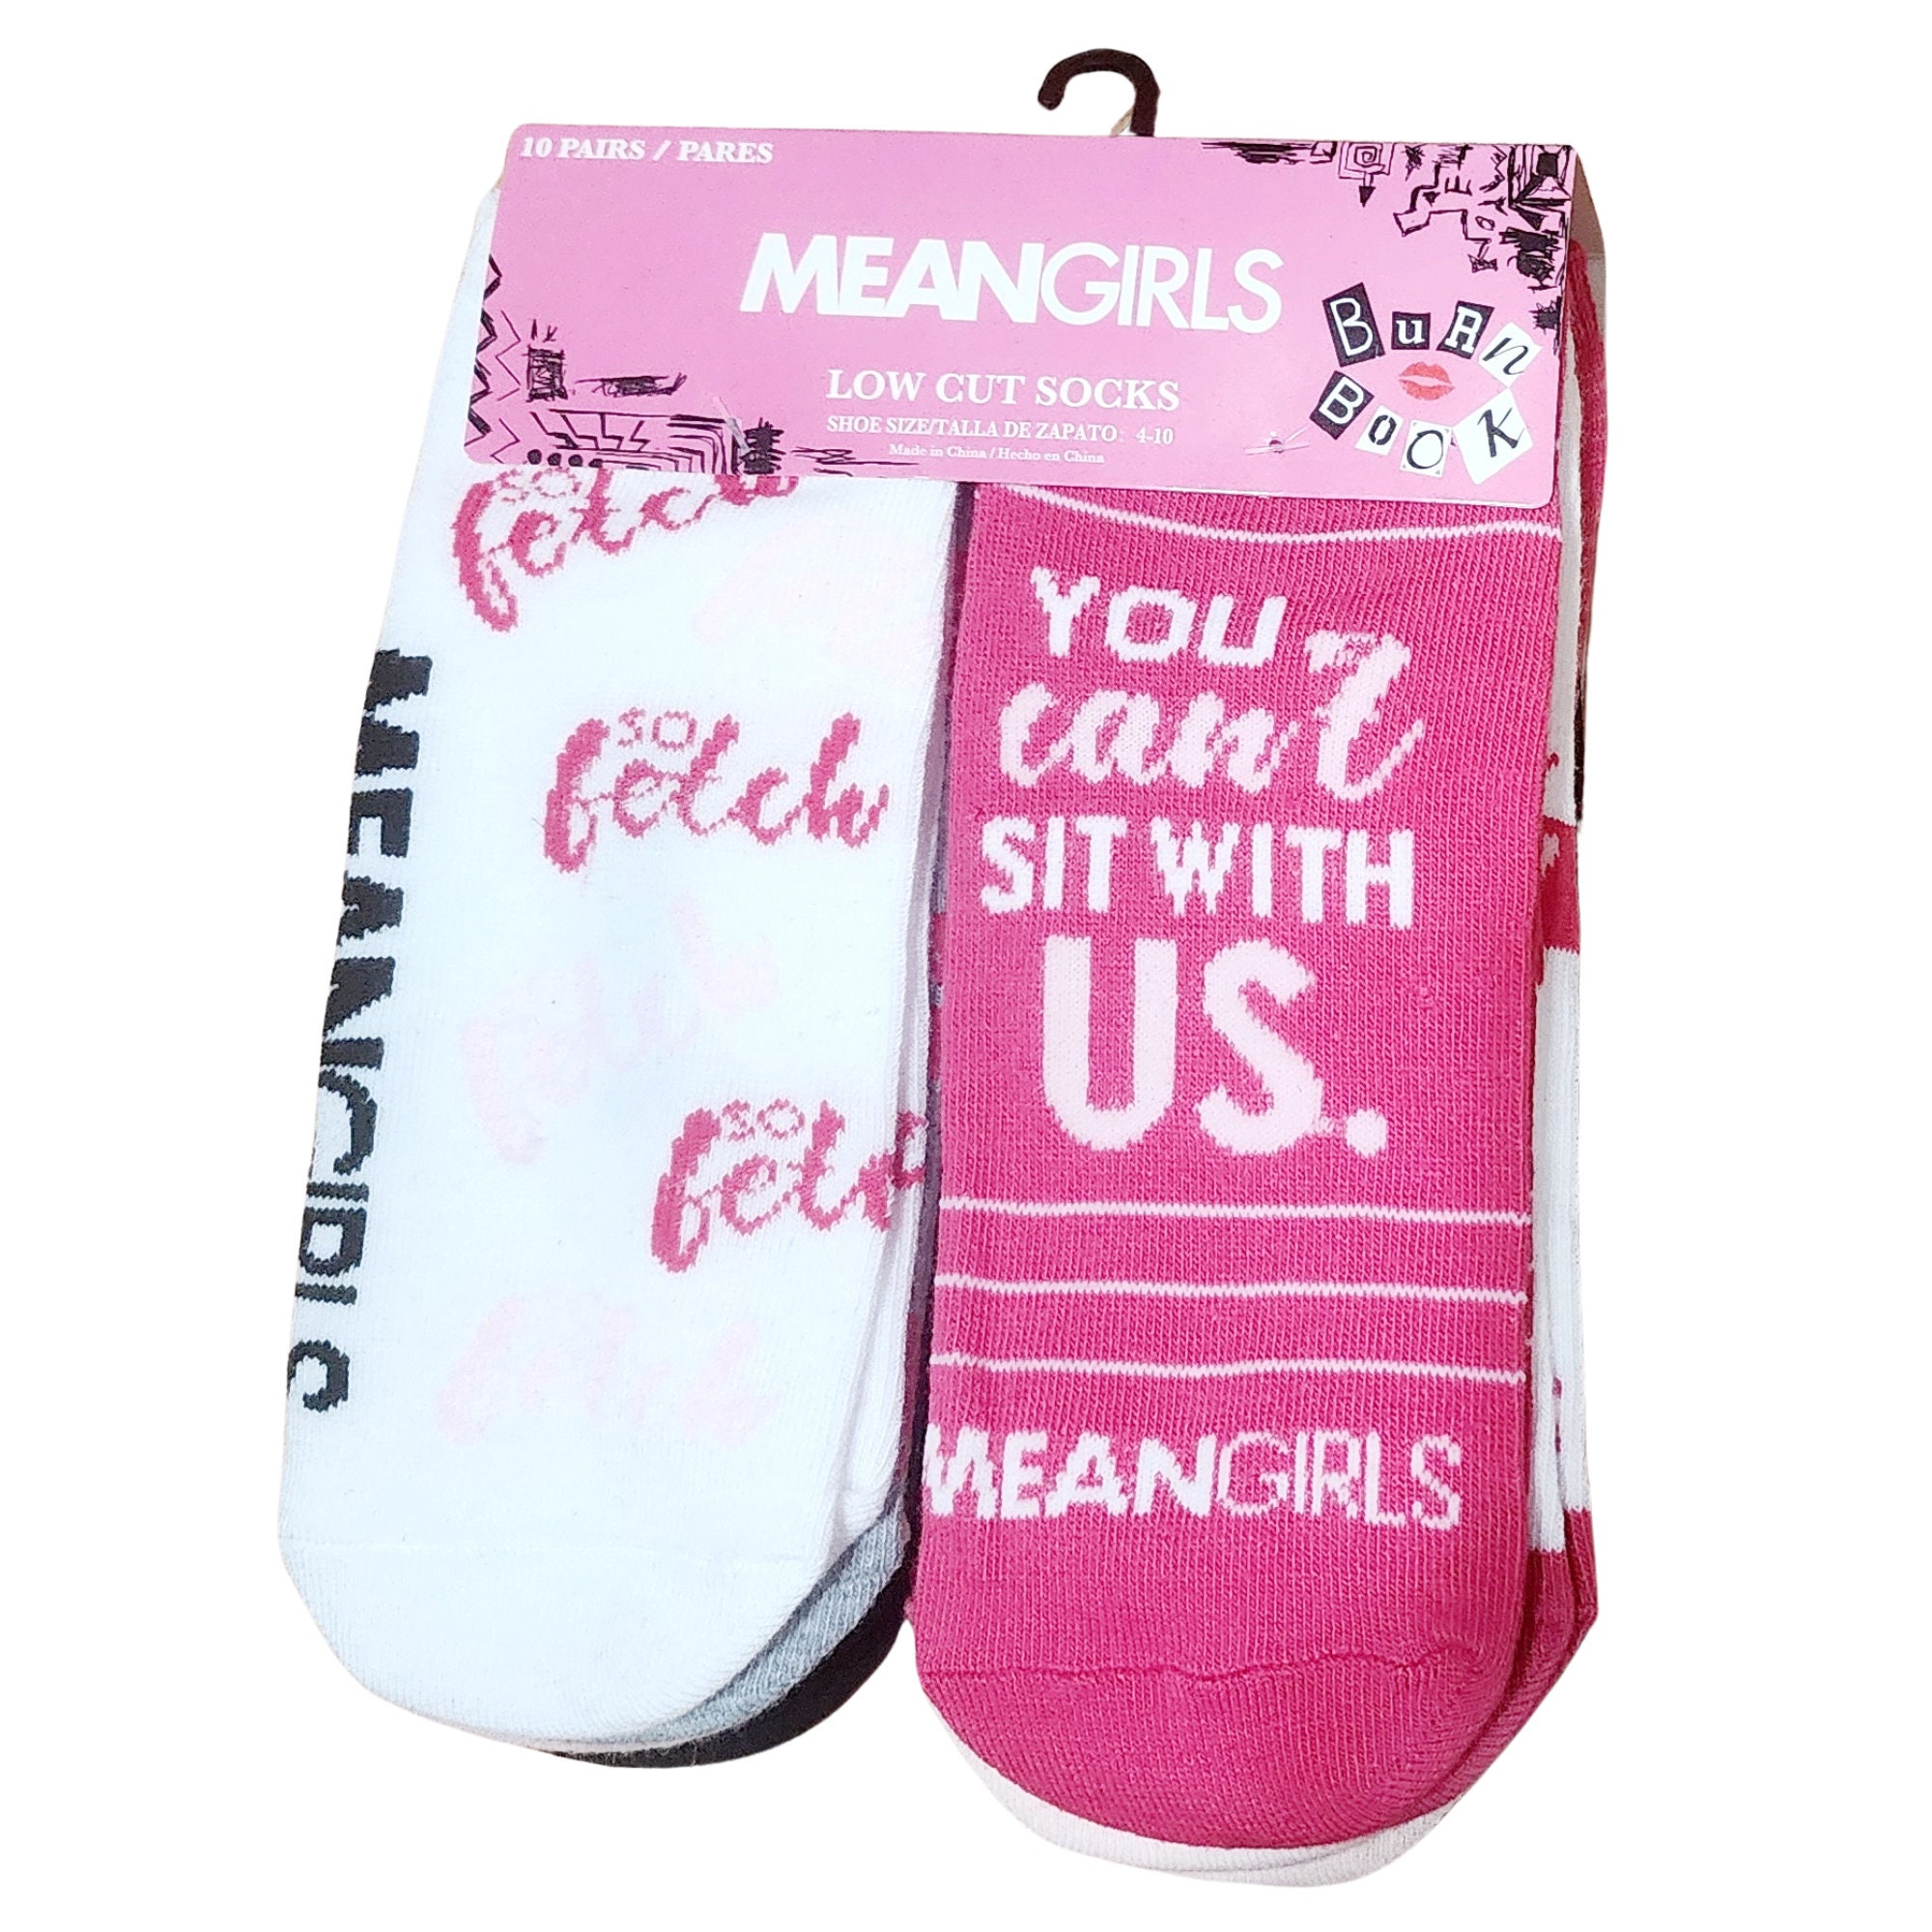 Mean Girls Socks Black - $18 New With Tags - From Yesenia